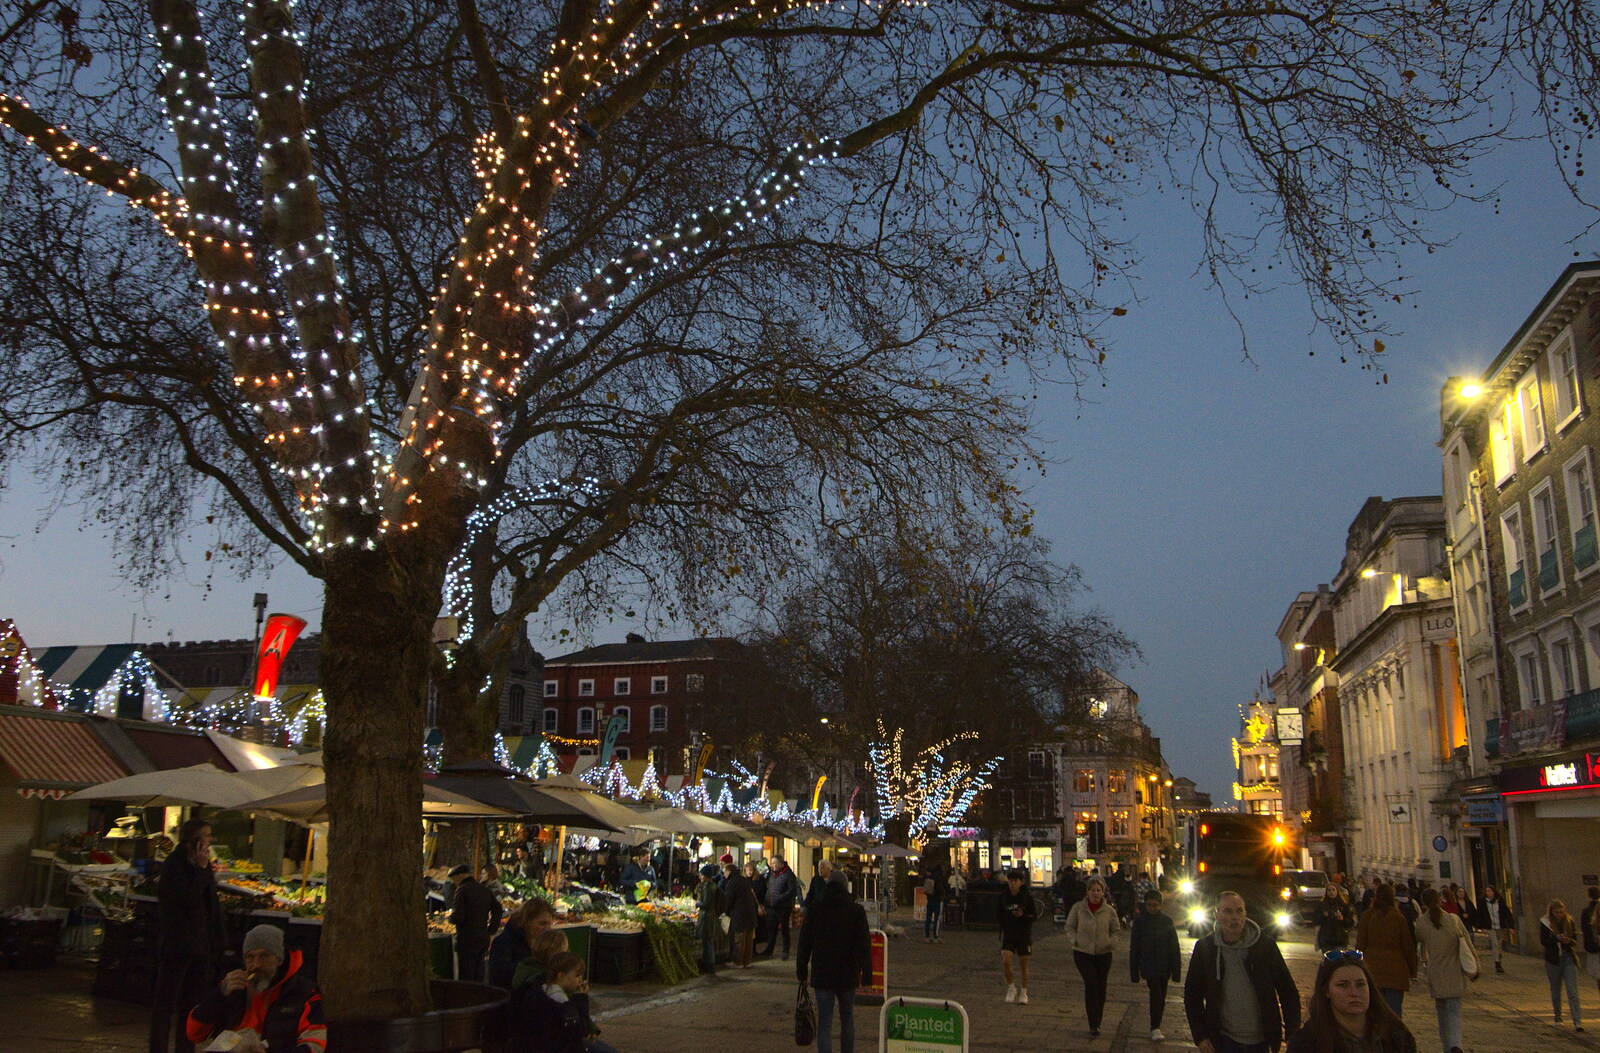 Illuminated trees and market on Gentleman's Walk from Christmas Shopping in Norwich, Norfolk - 21st December 2022